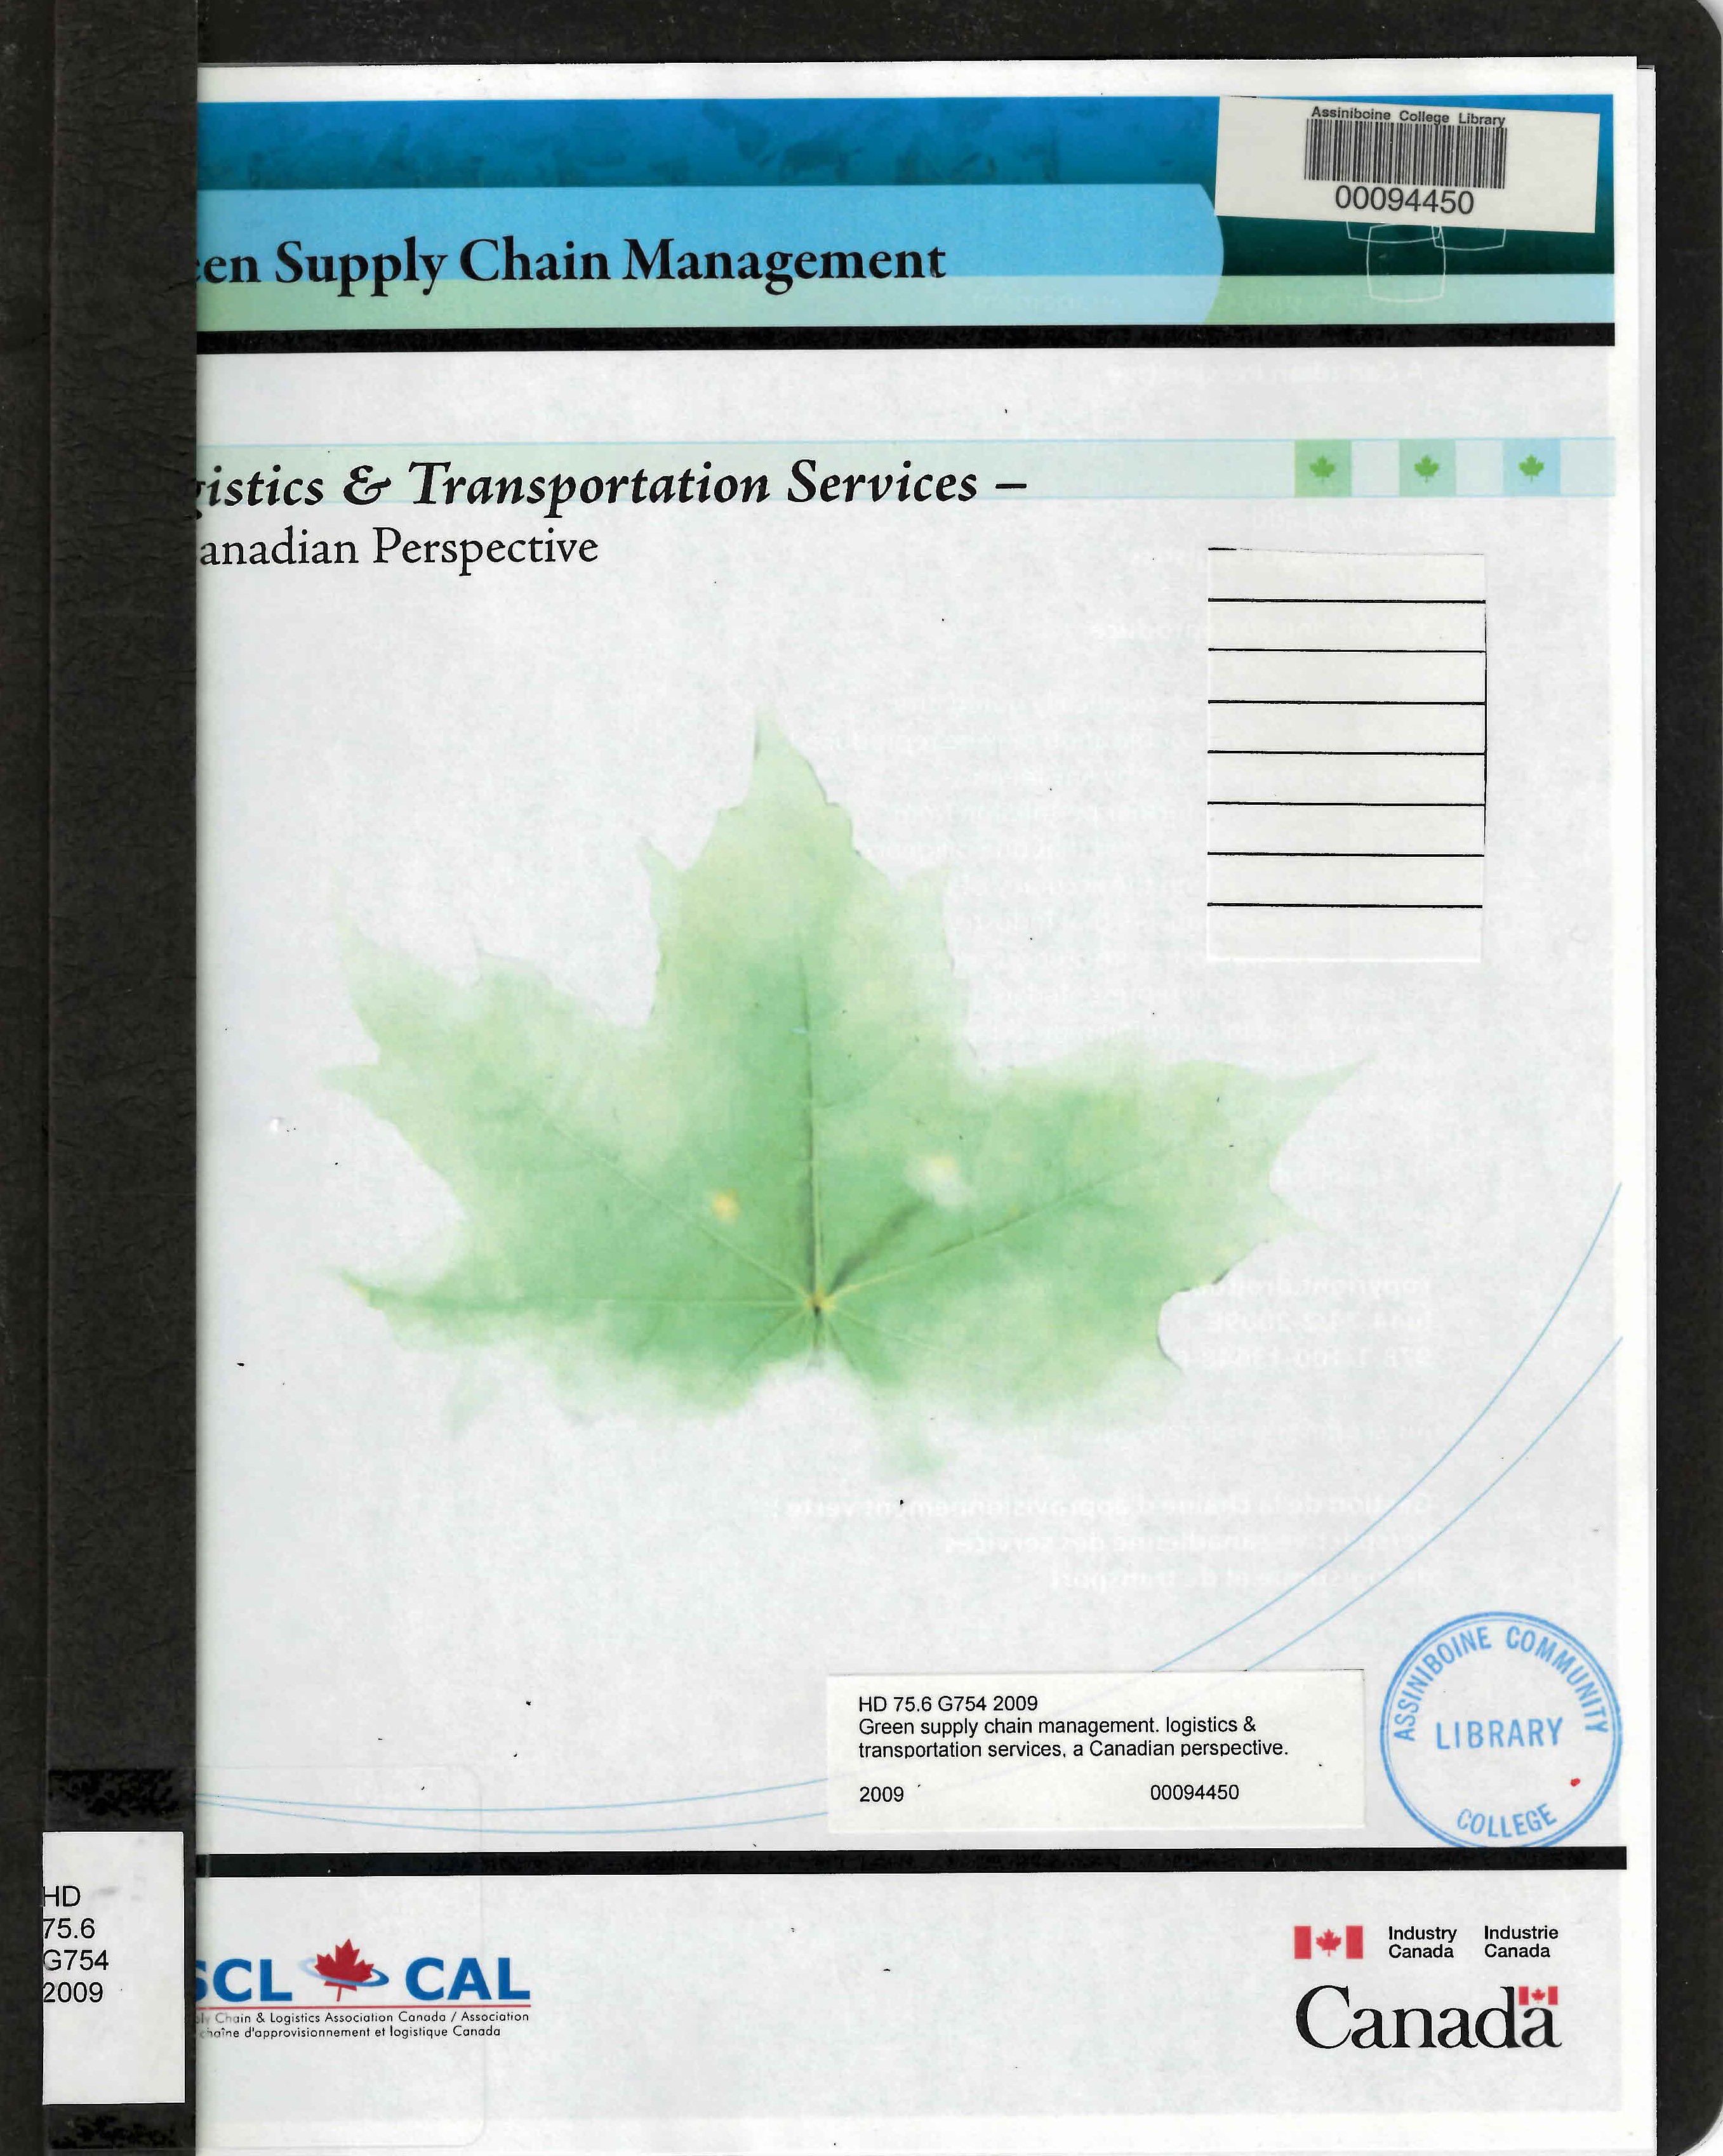 Green supply chain management. logistics & transportation services, a Canadian perspective.